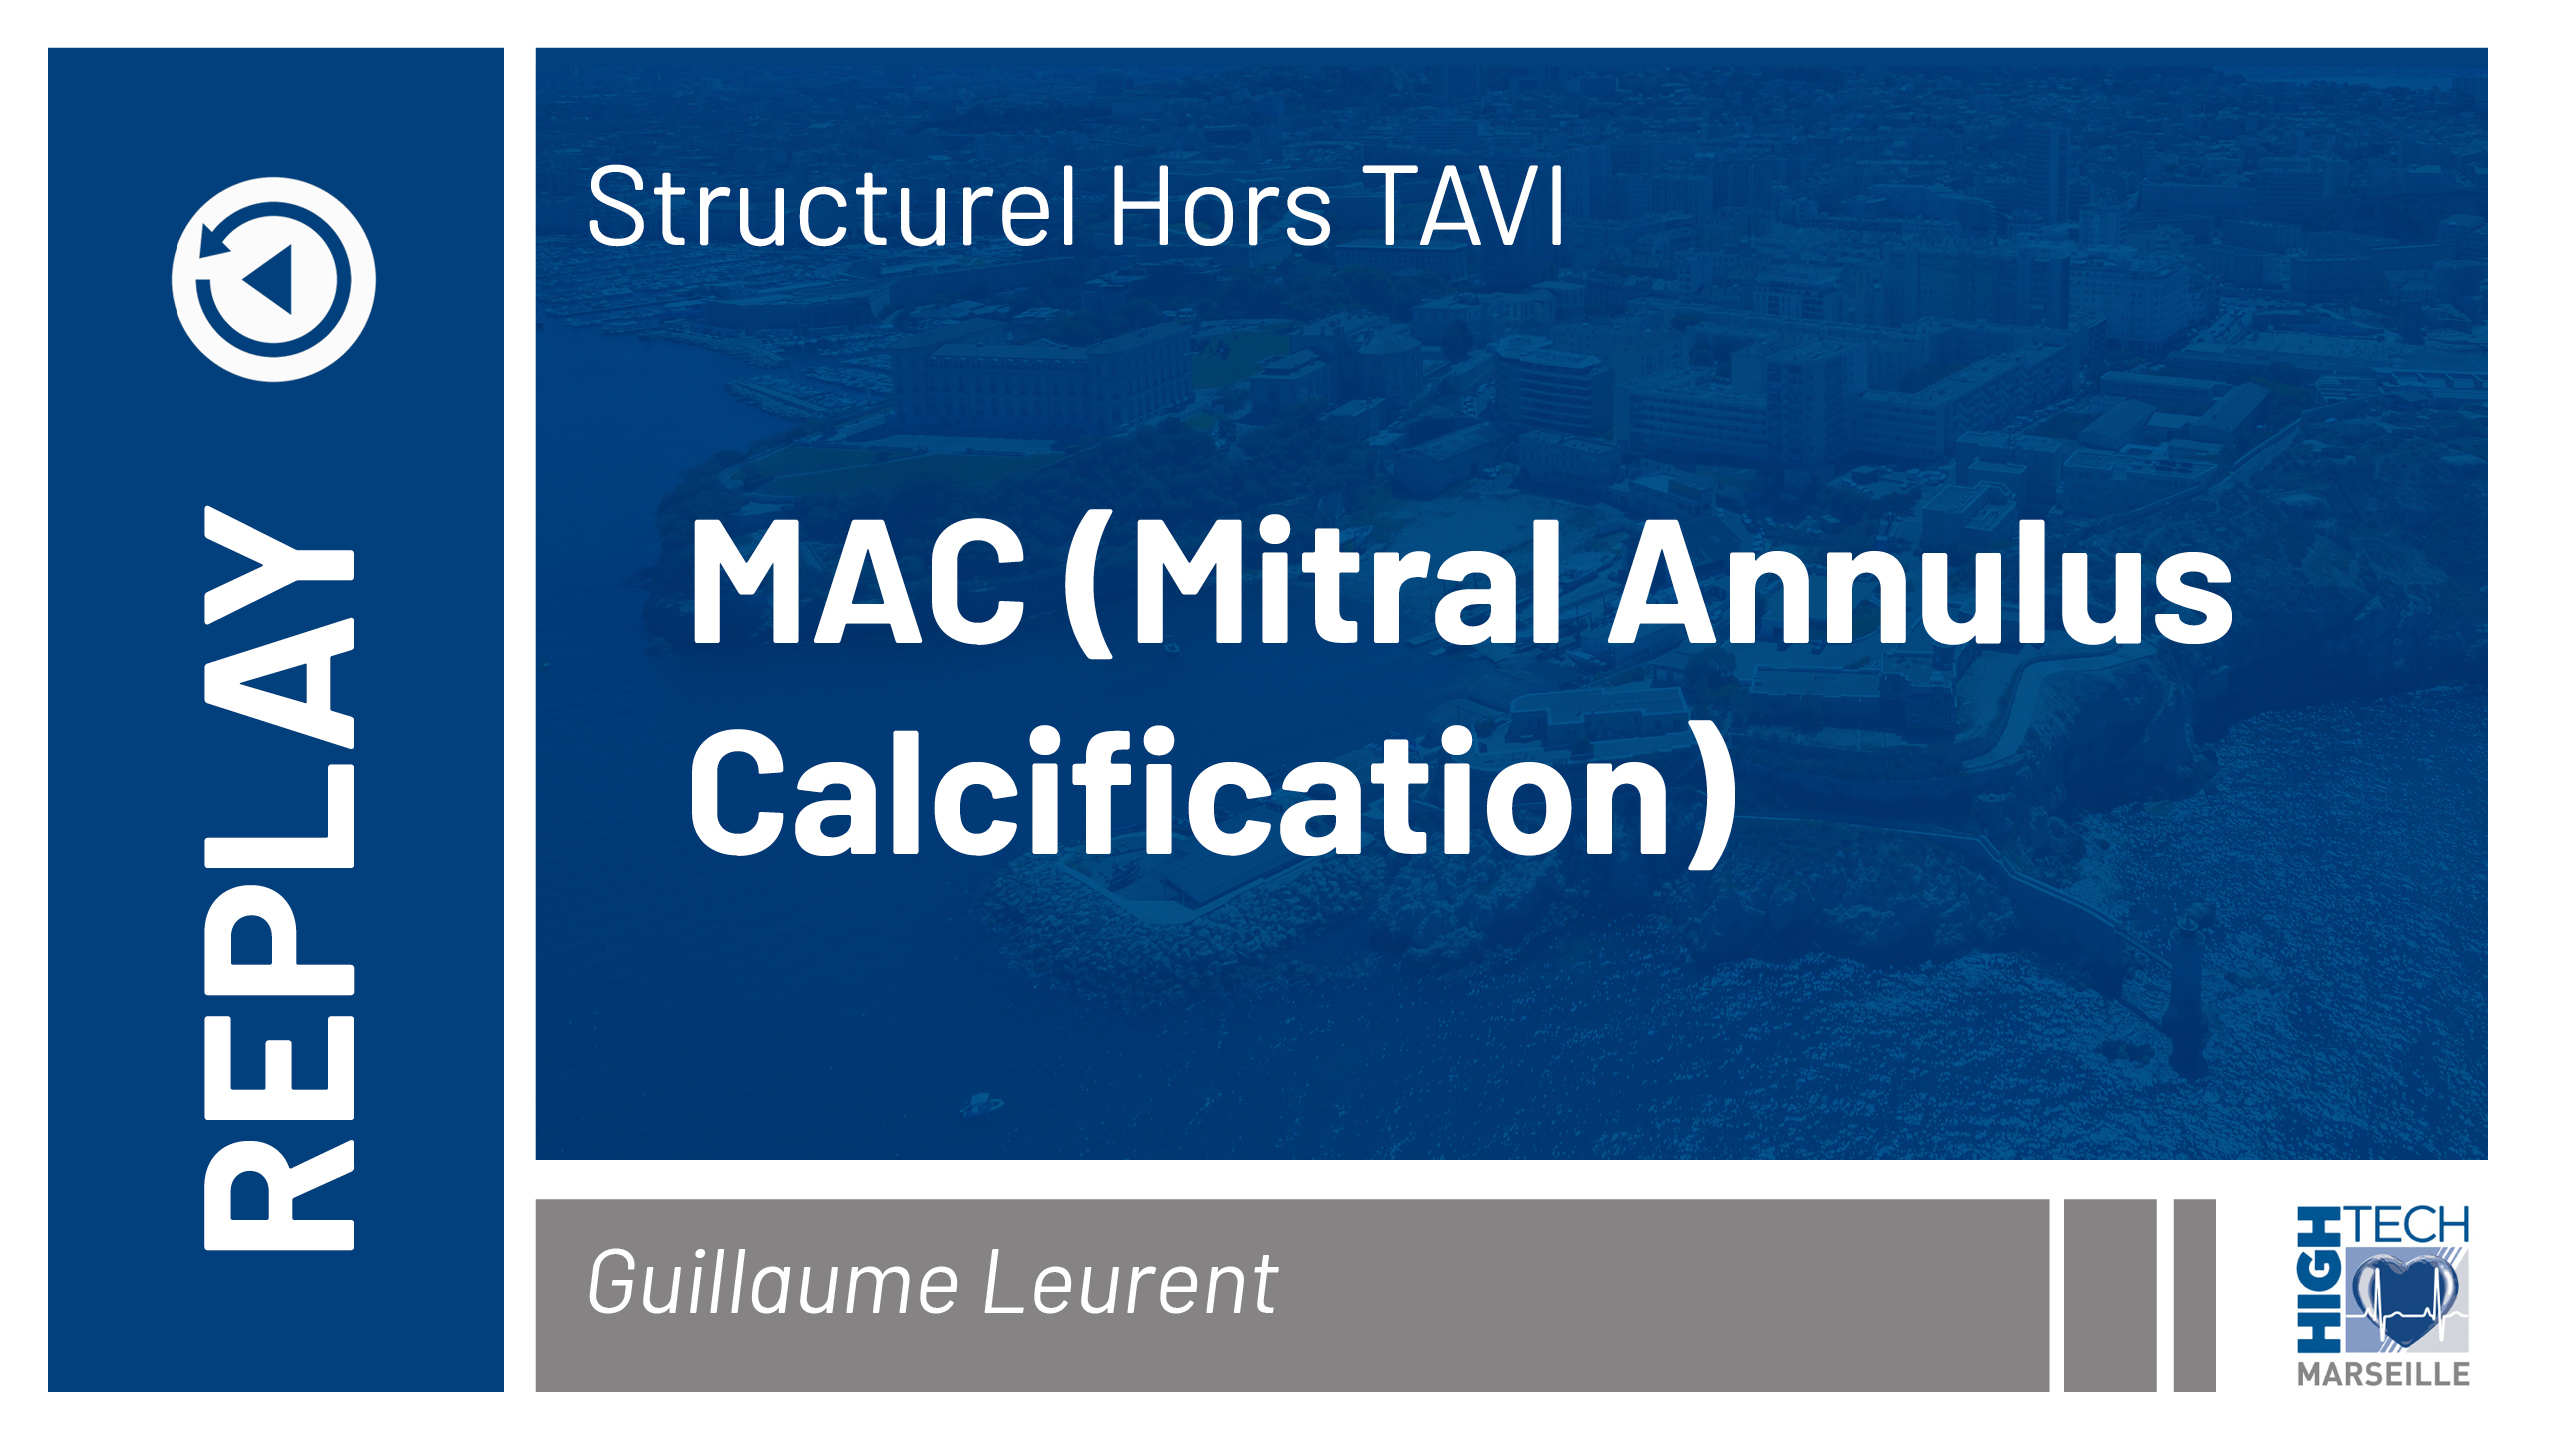 MAC (Mitral Annulus Calcification) – Guillaume Leurent